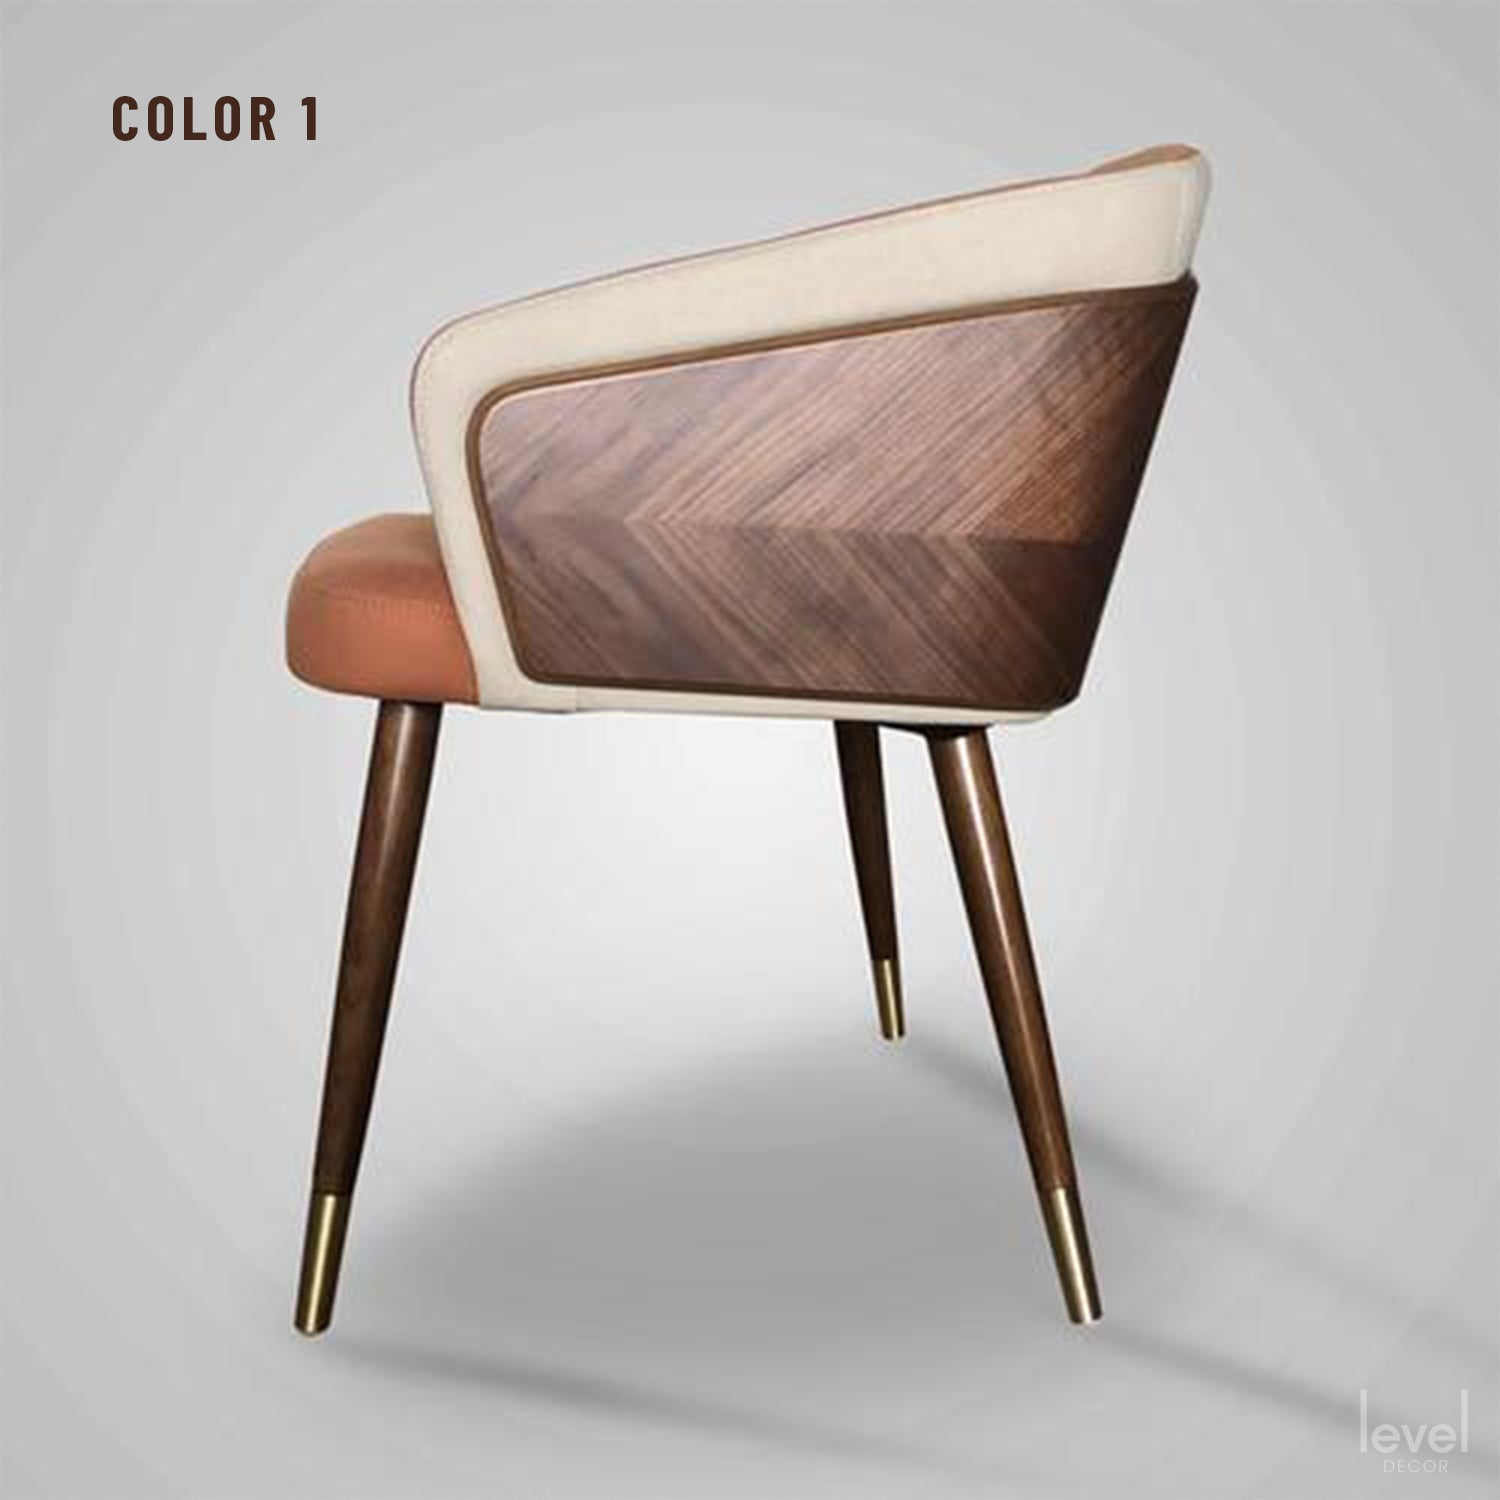 Modern Solid Wood Leisure Chairs - Color 1 - Level Decor